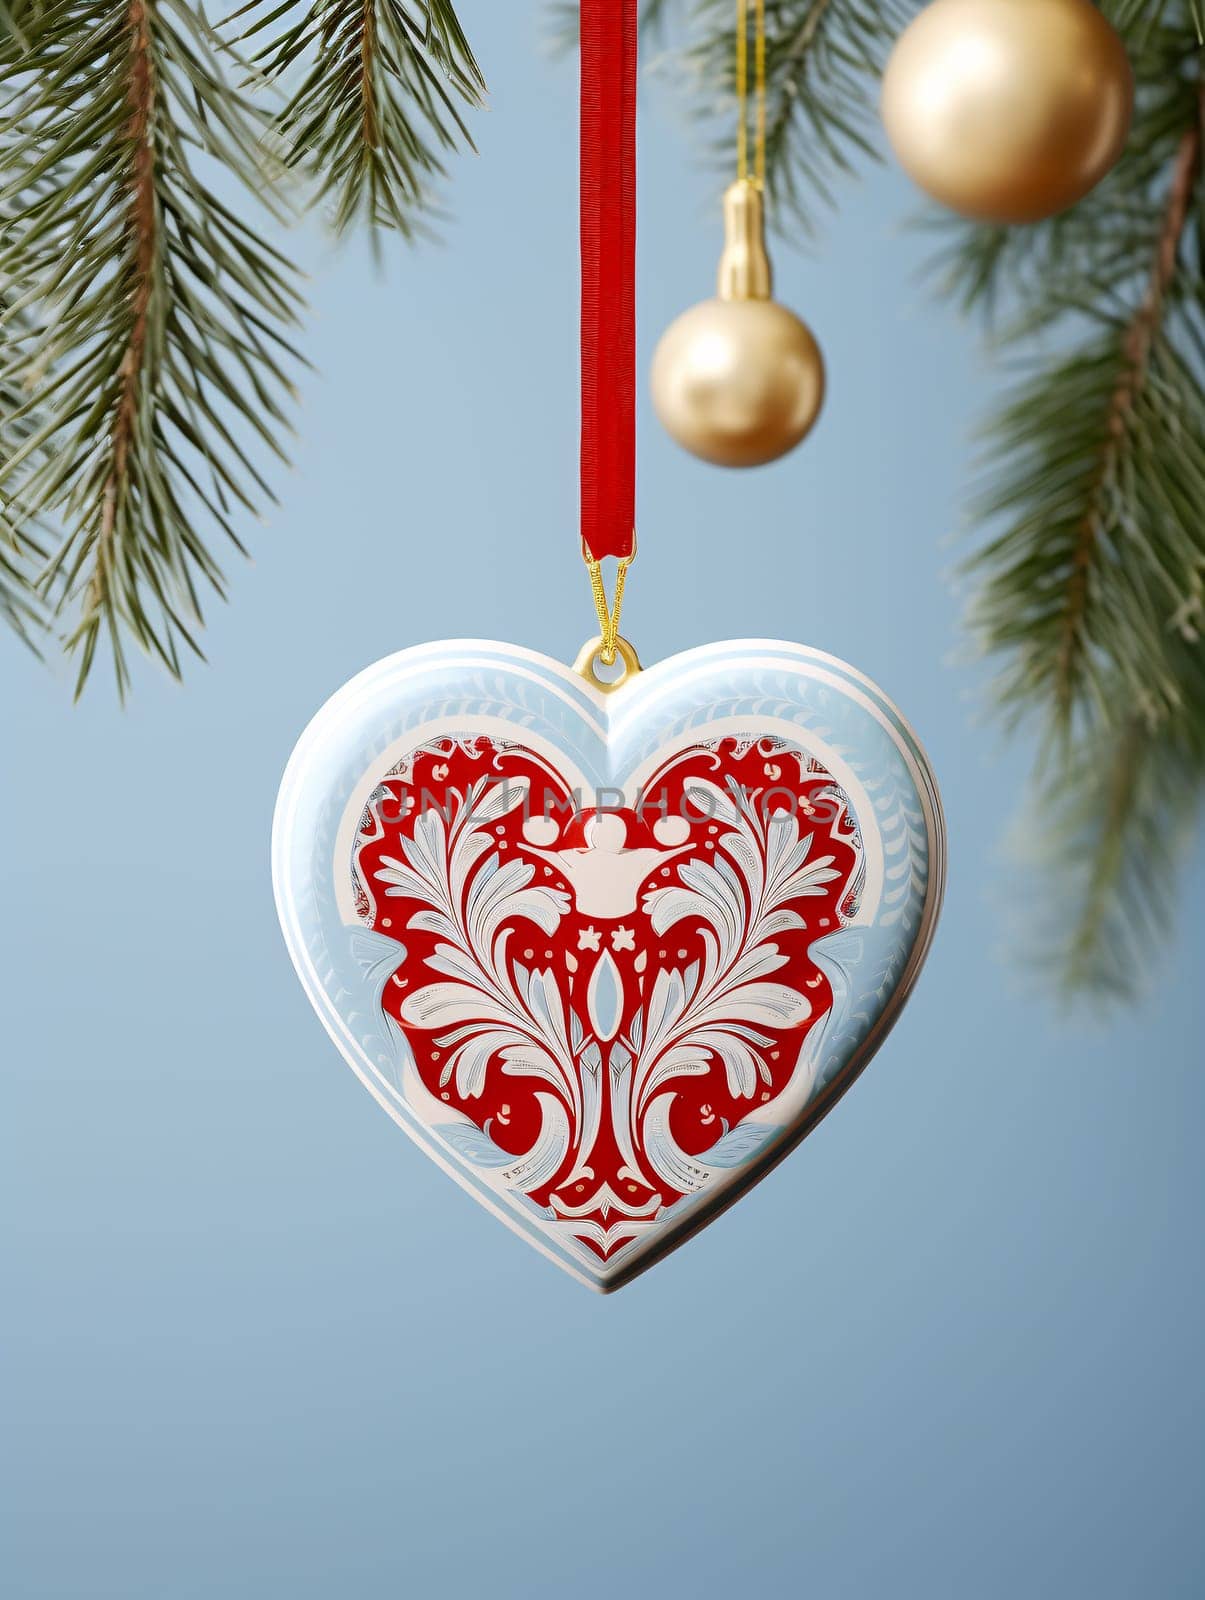 A heart-shaped Christmas bauble with intricate red and white design, hanging from a pine branch on a red ribbon, with golden decorations